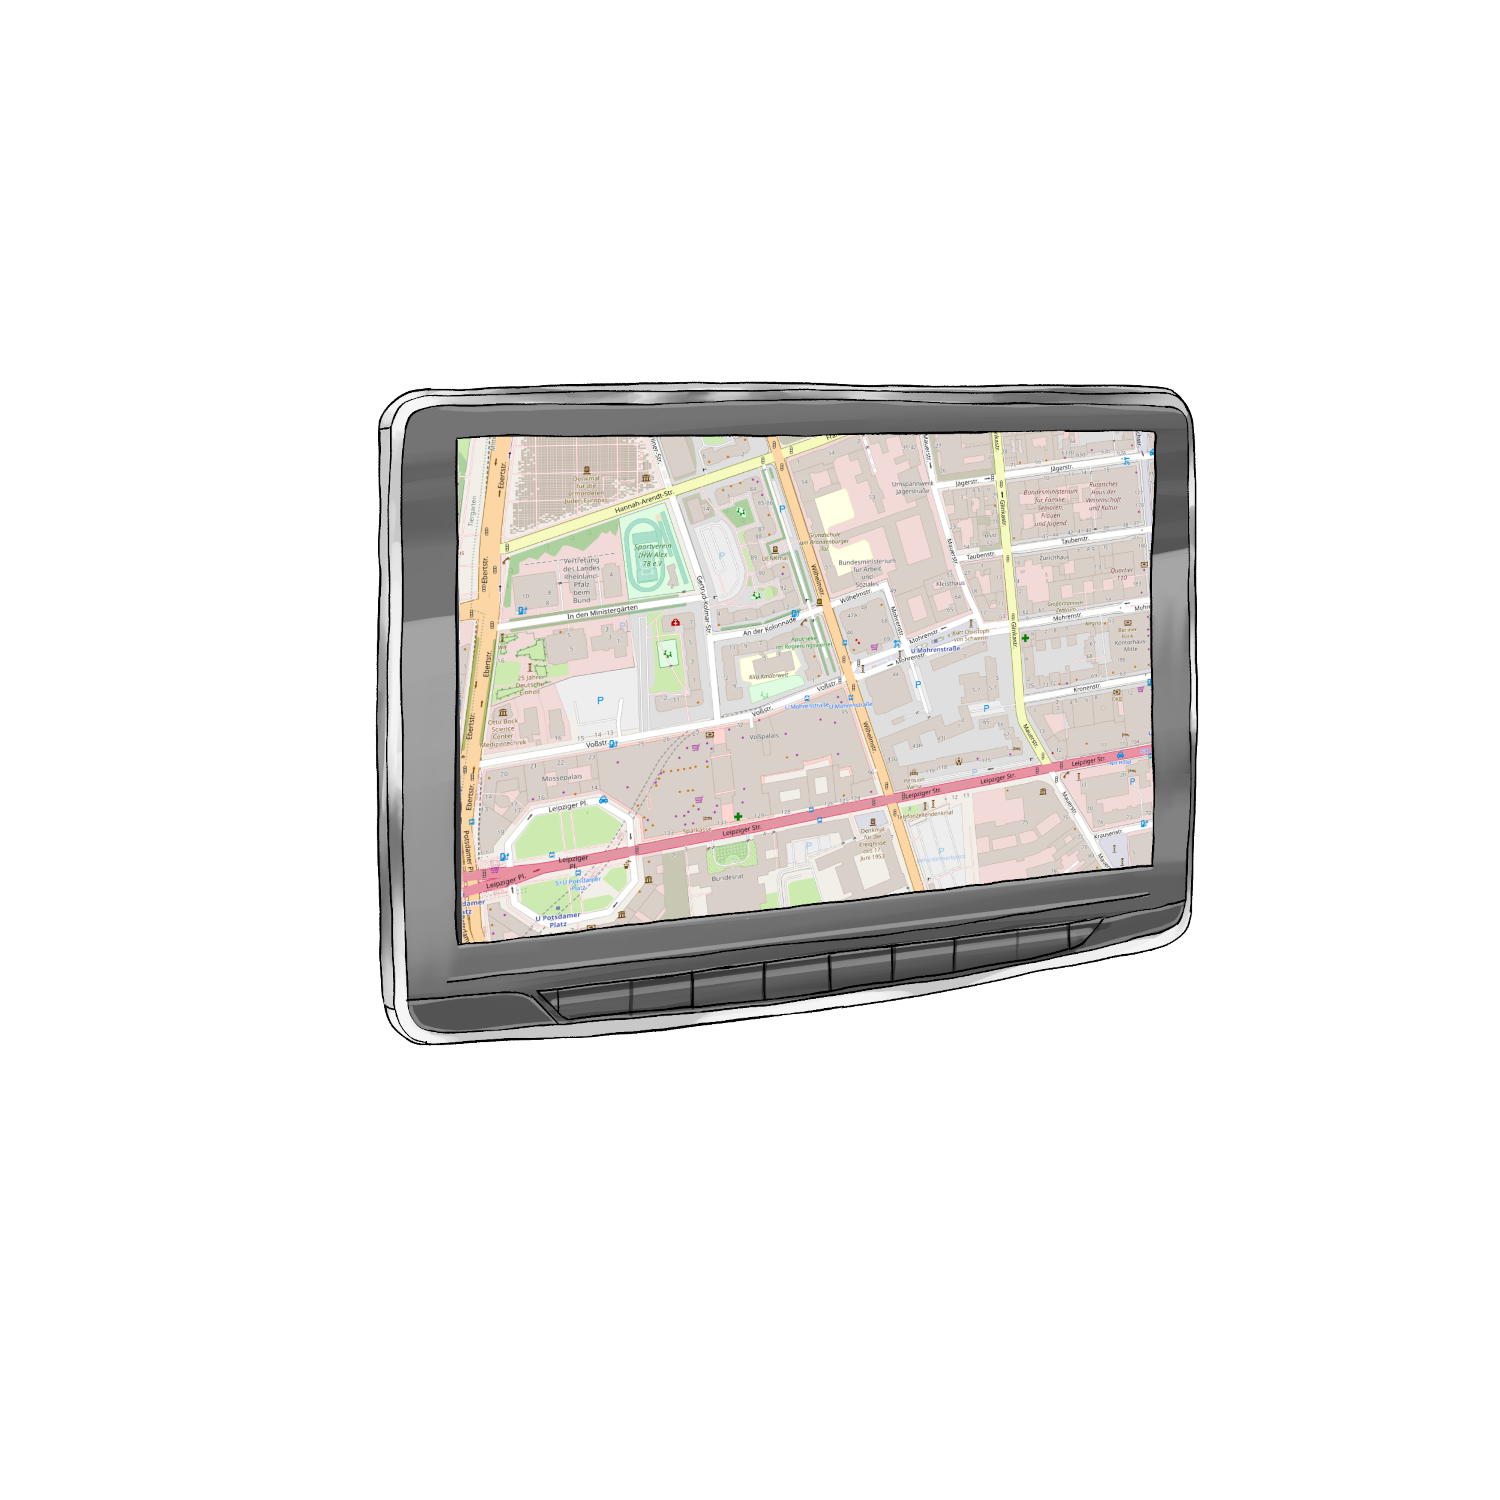  Product image 1 of the product “GPS Navigator Multi ”